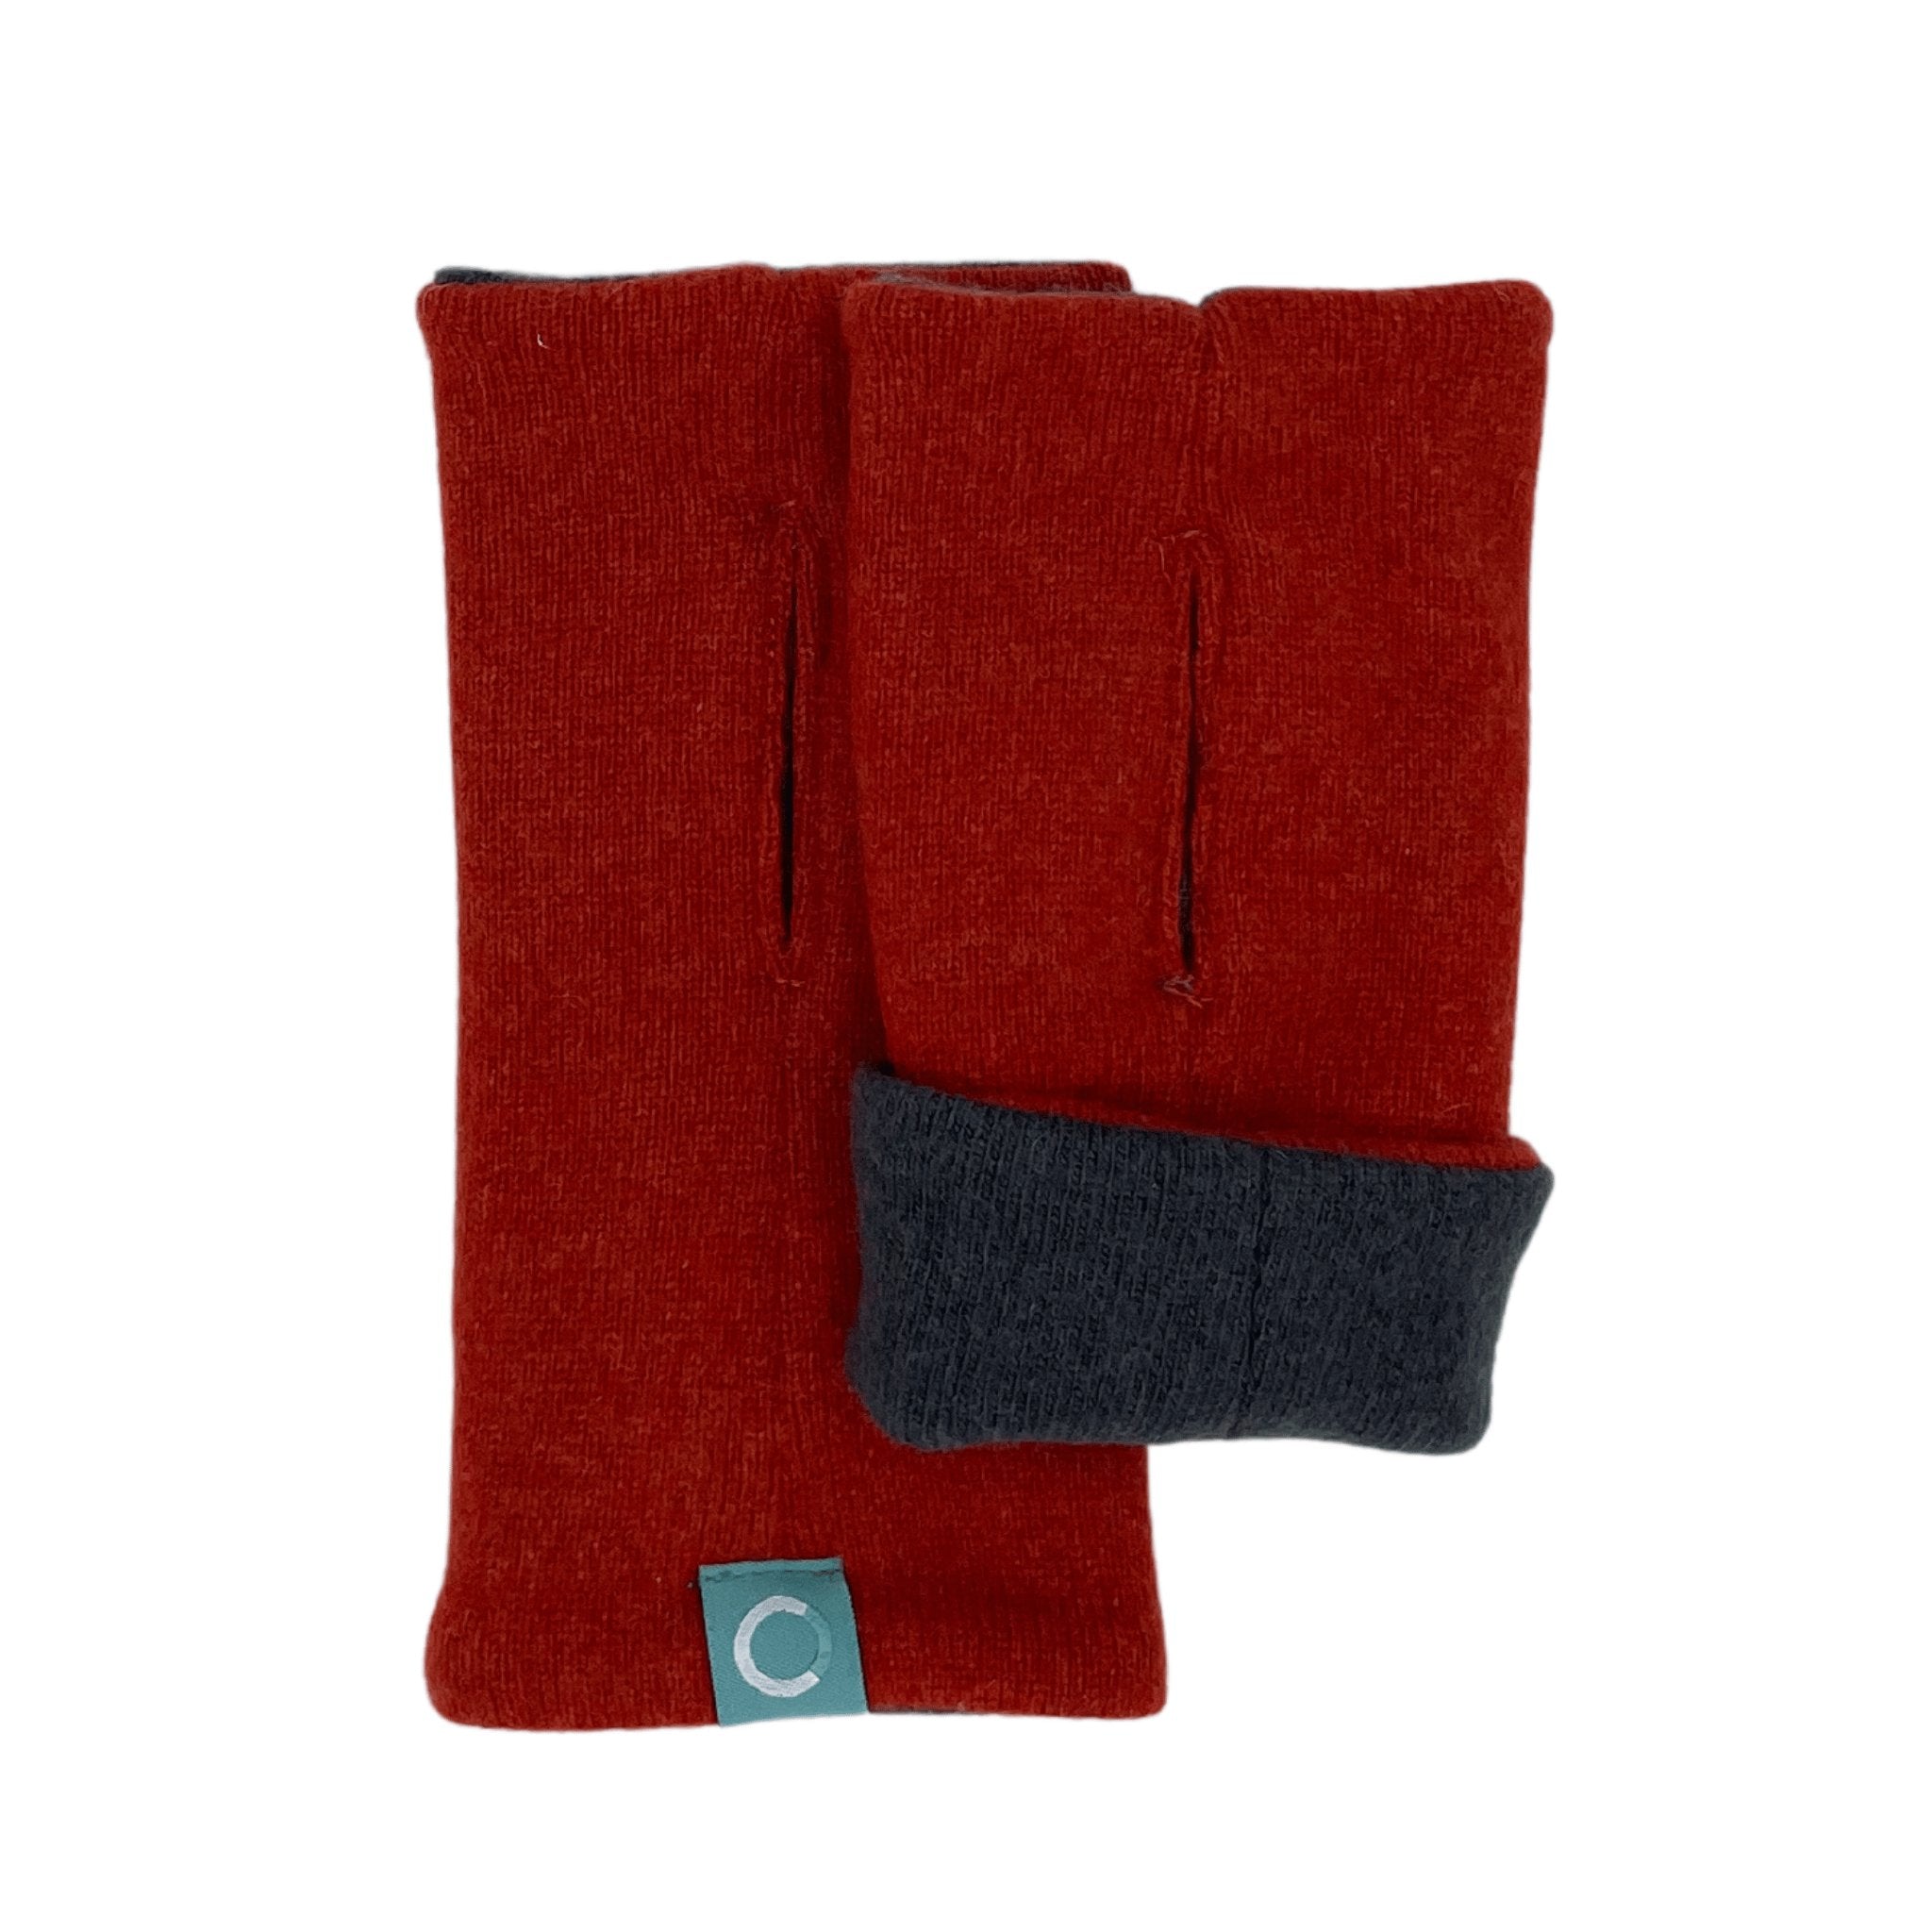 Recycled Cashmere Gloves | Ladies - Rust & Dark Grey - Cashmere Circle